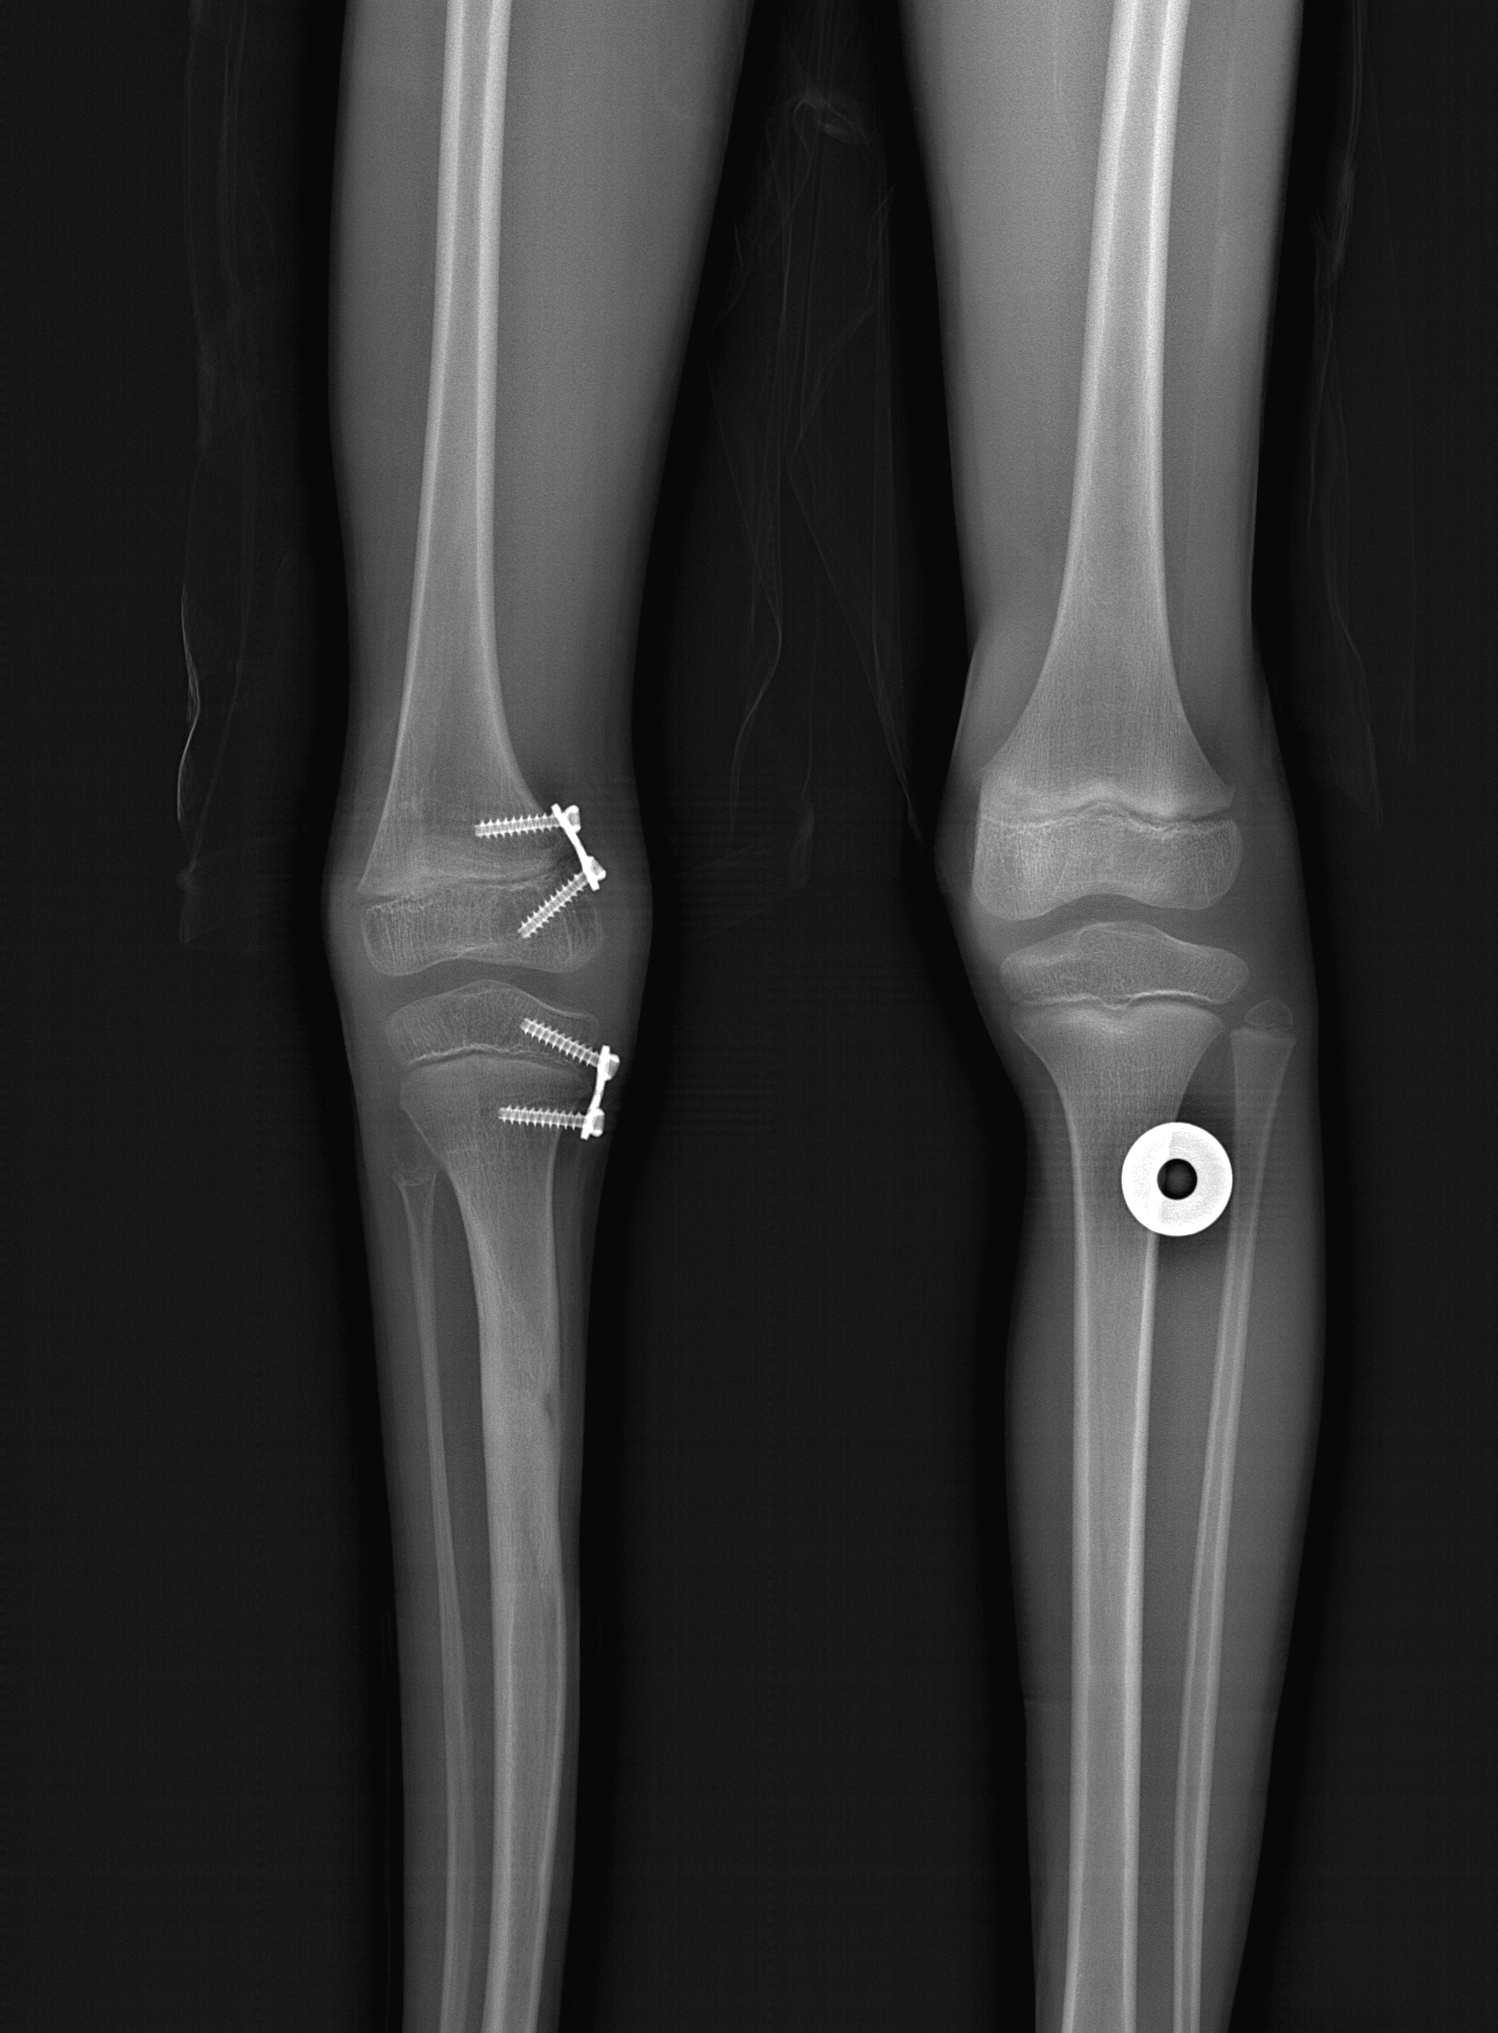 8plate on femur and tibia